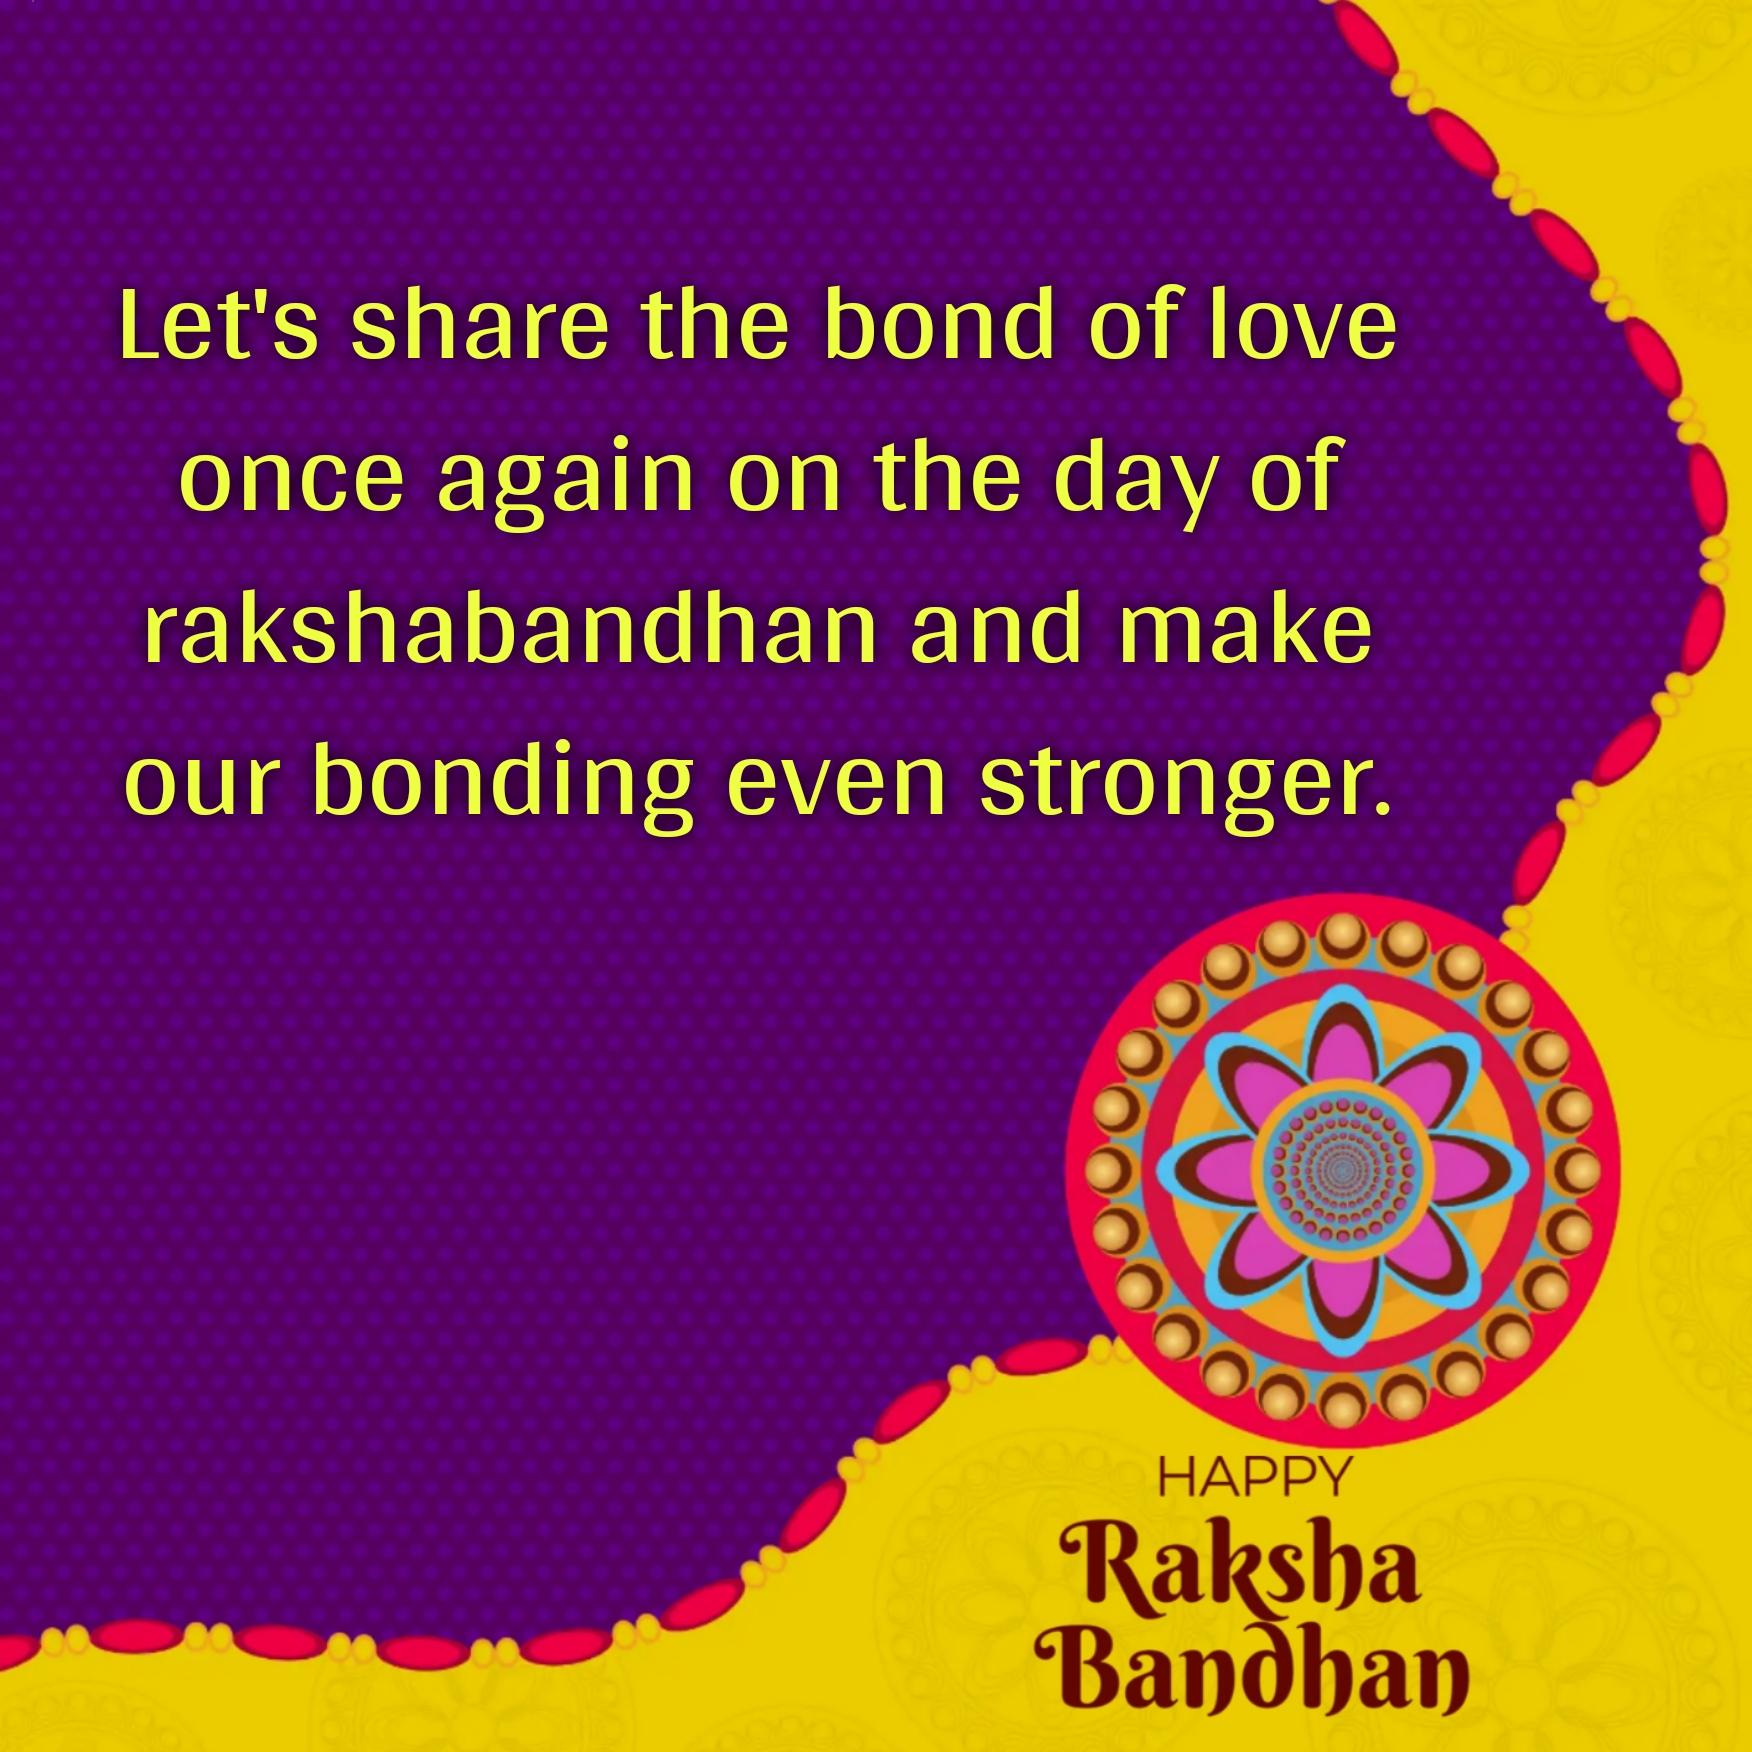 Let's share the bond of love once again on the day of rakshabandhan